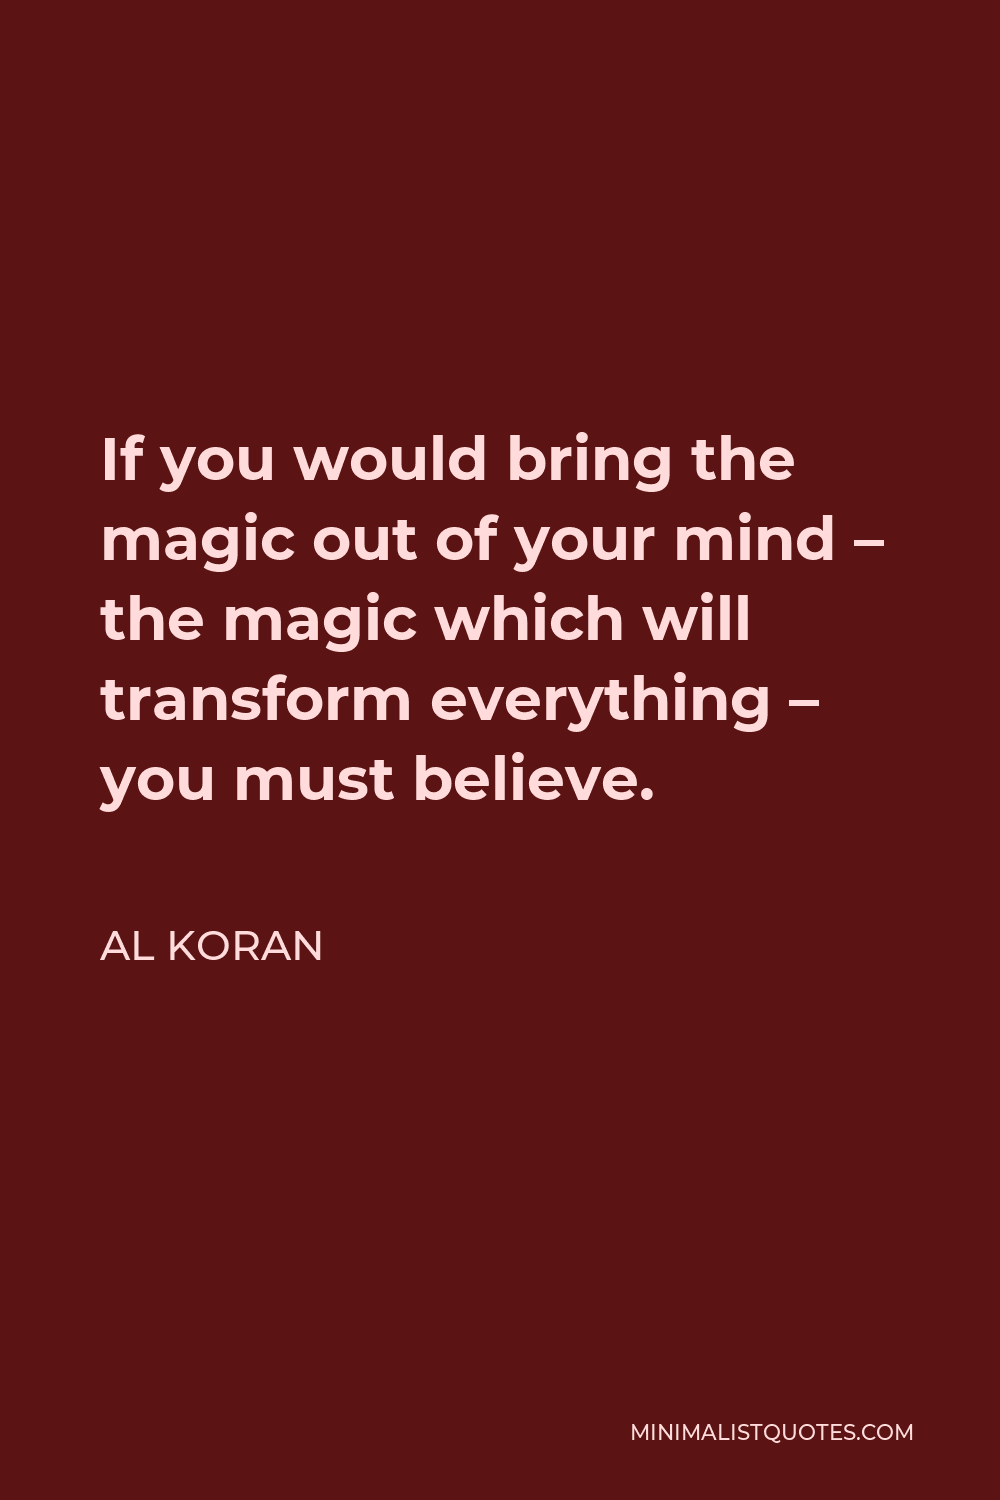 Al Koran Quote - If you would bring the magic out of your mind – the magic which will transform everything – you must believe.